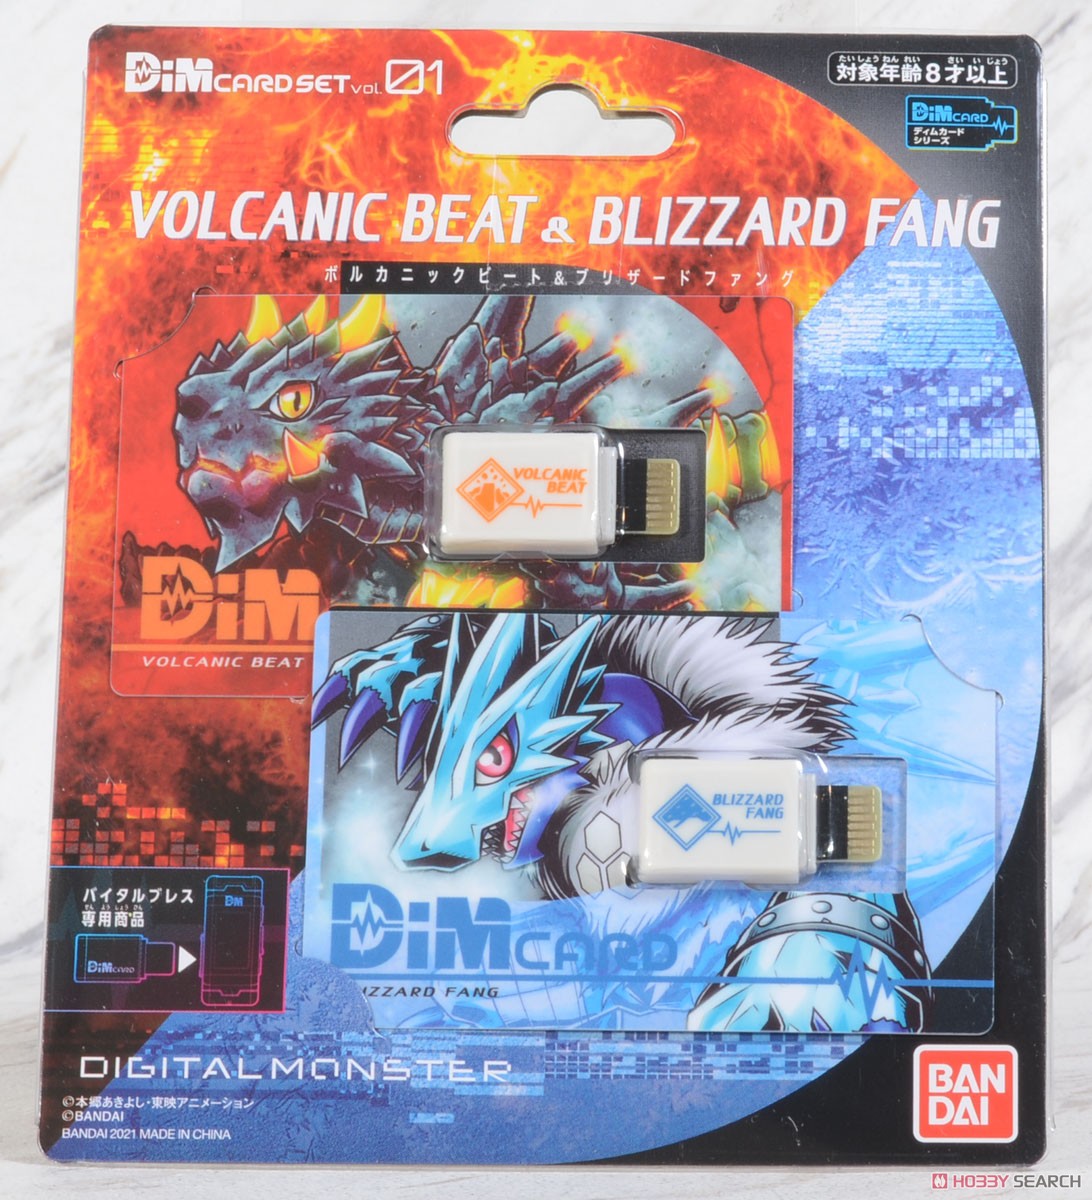 Dim Card Set Vol.1 Volcanic Beat & Blizzard Fang (Character Toy) Package2